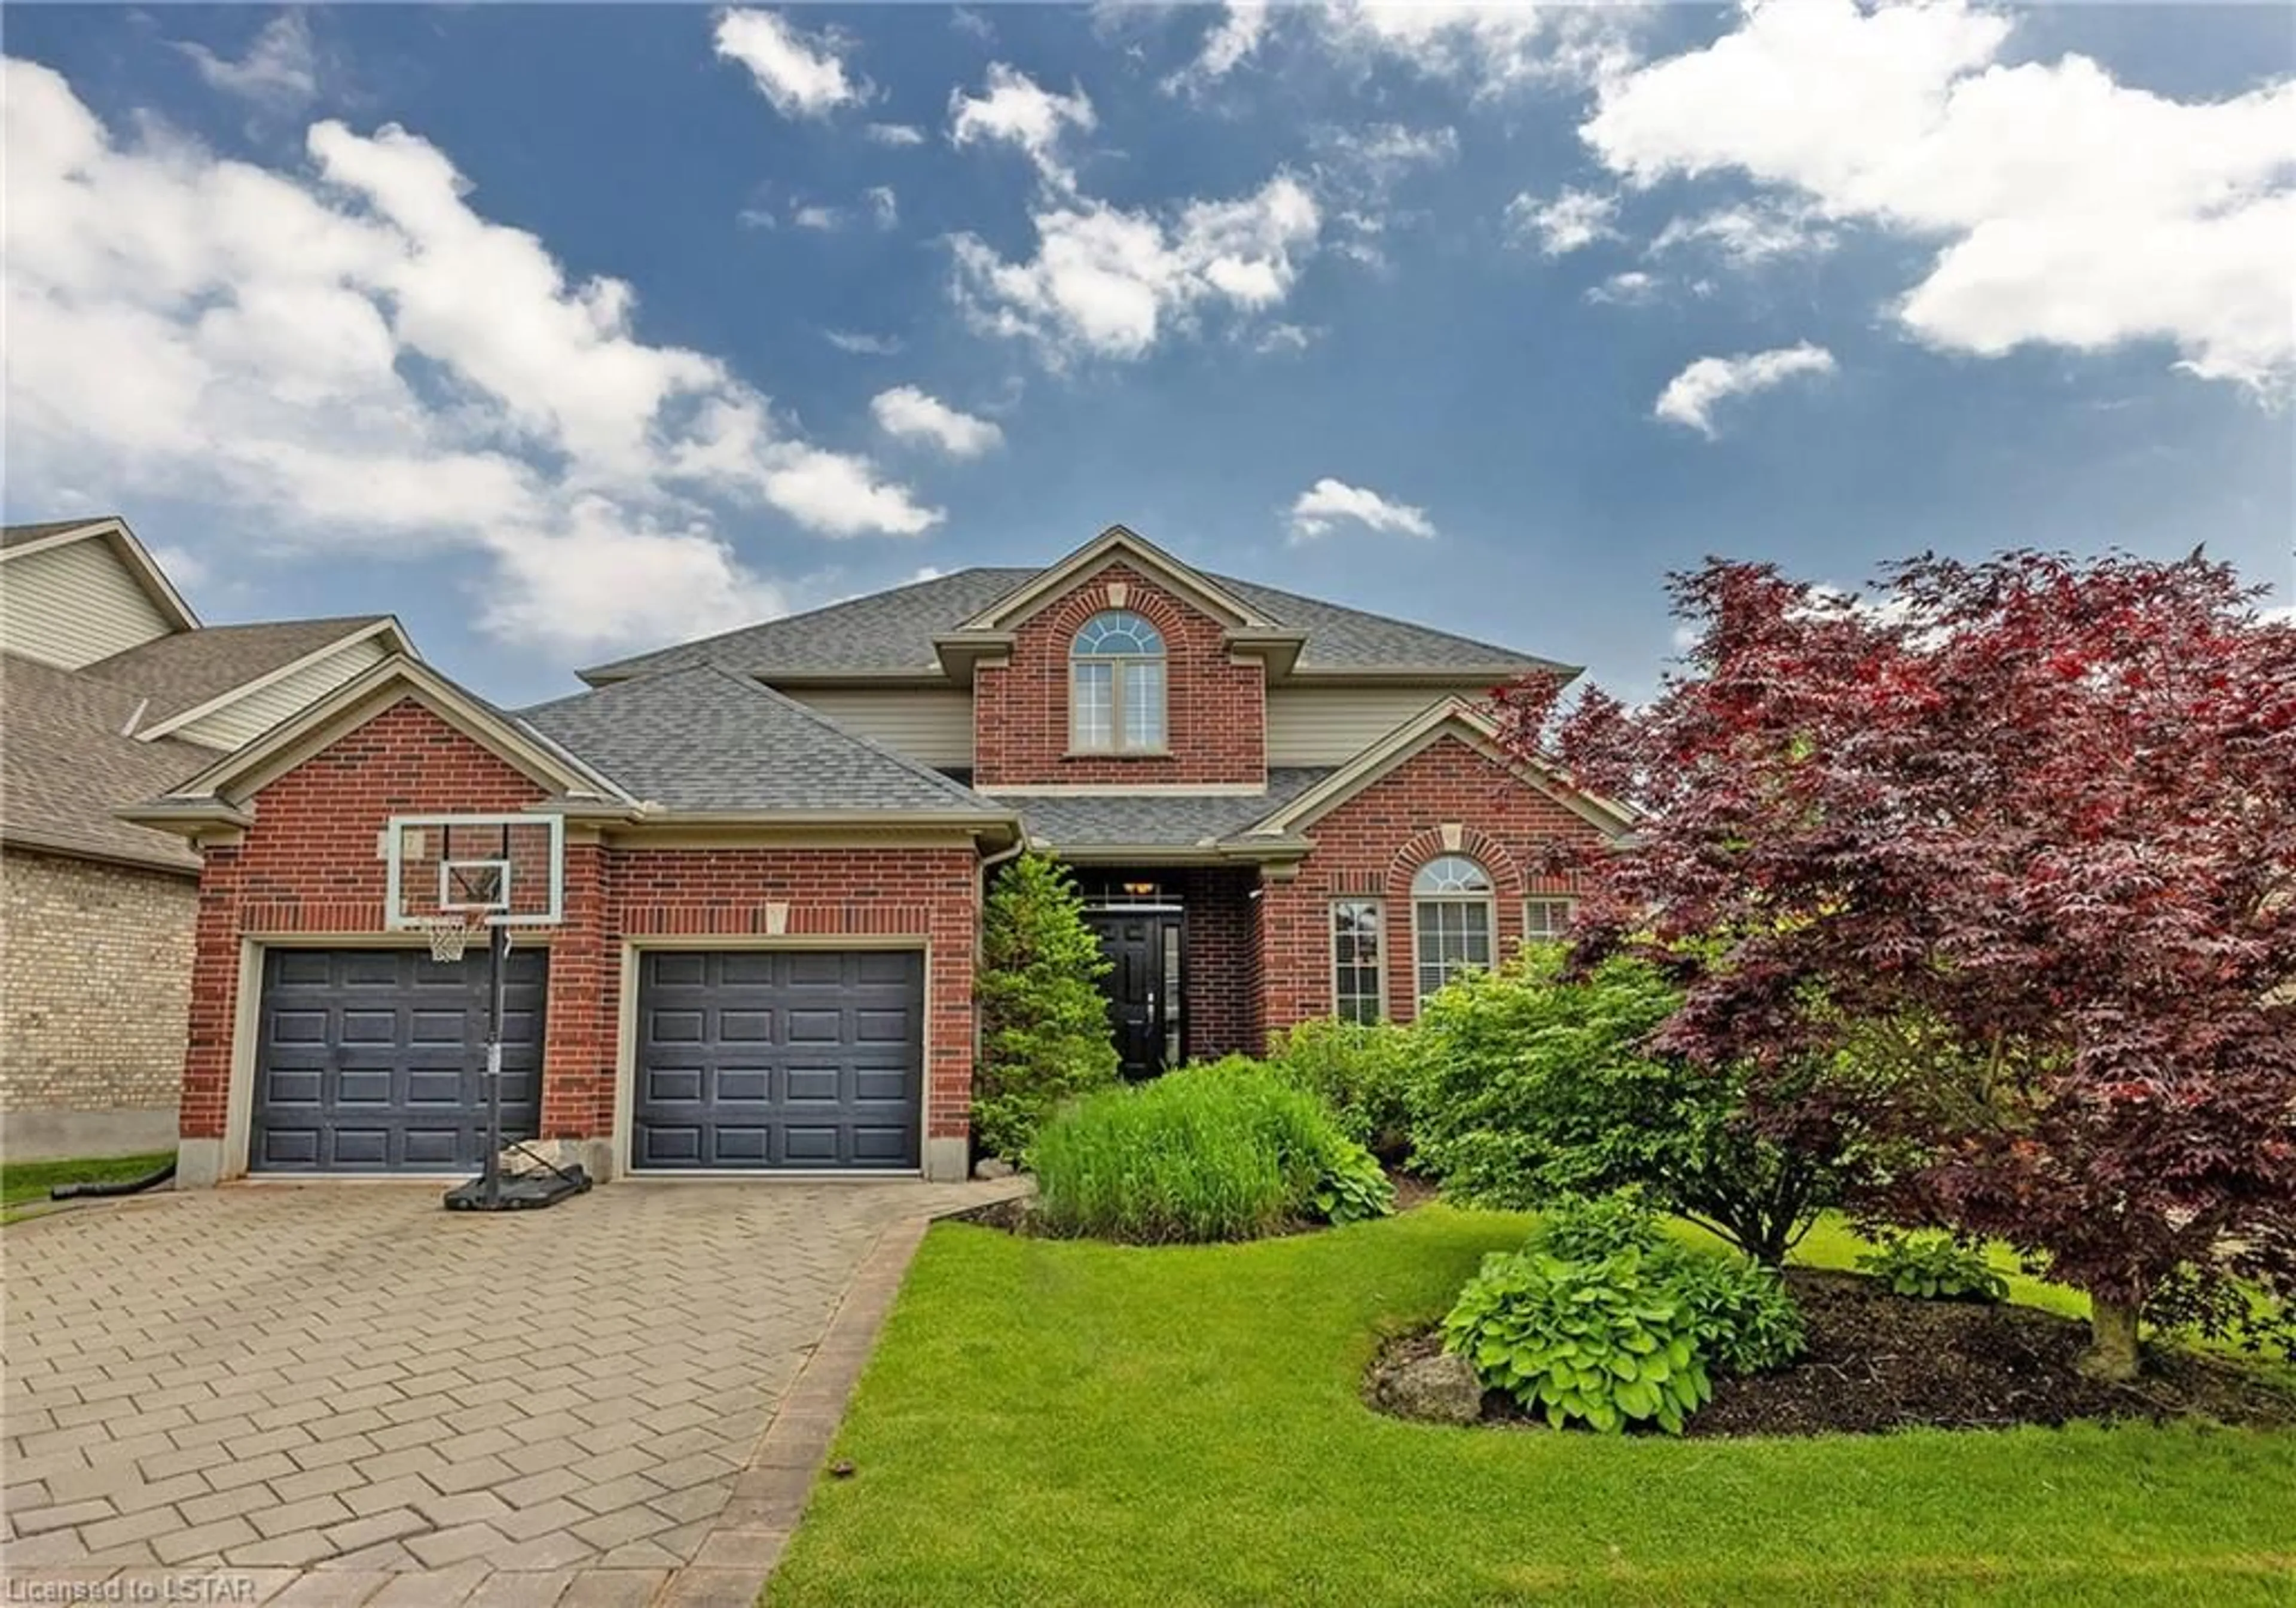 Home with brick exterior material for 337 Plane Tree Dr, London Ontario N6G 5J2